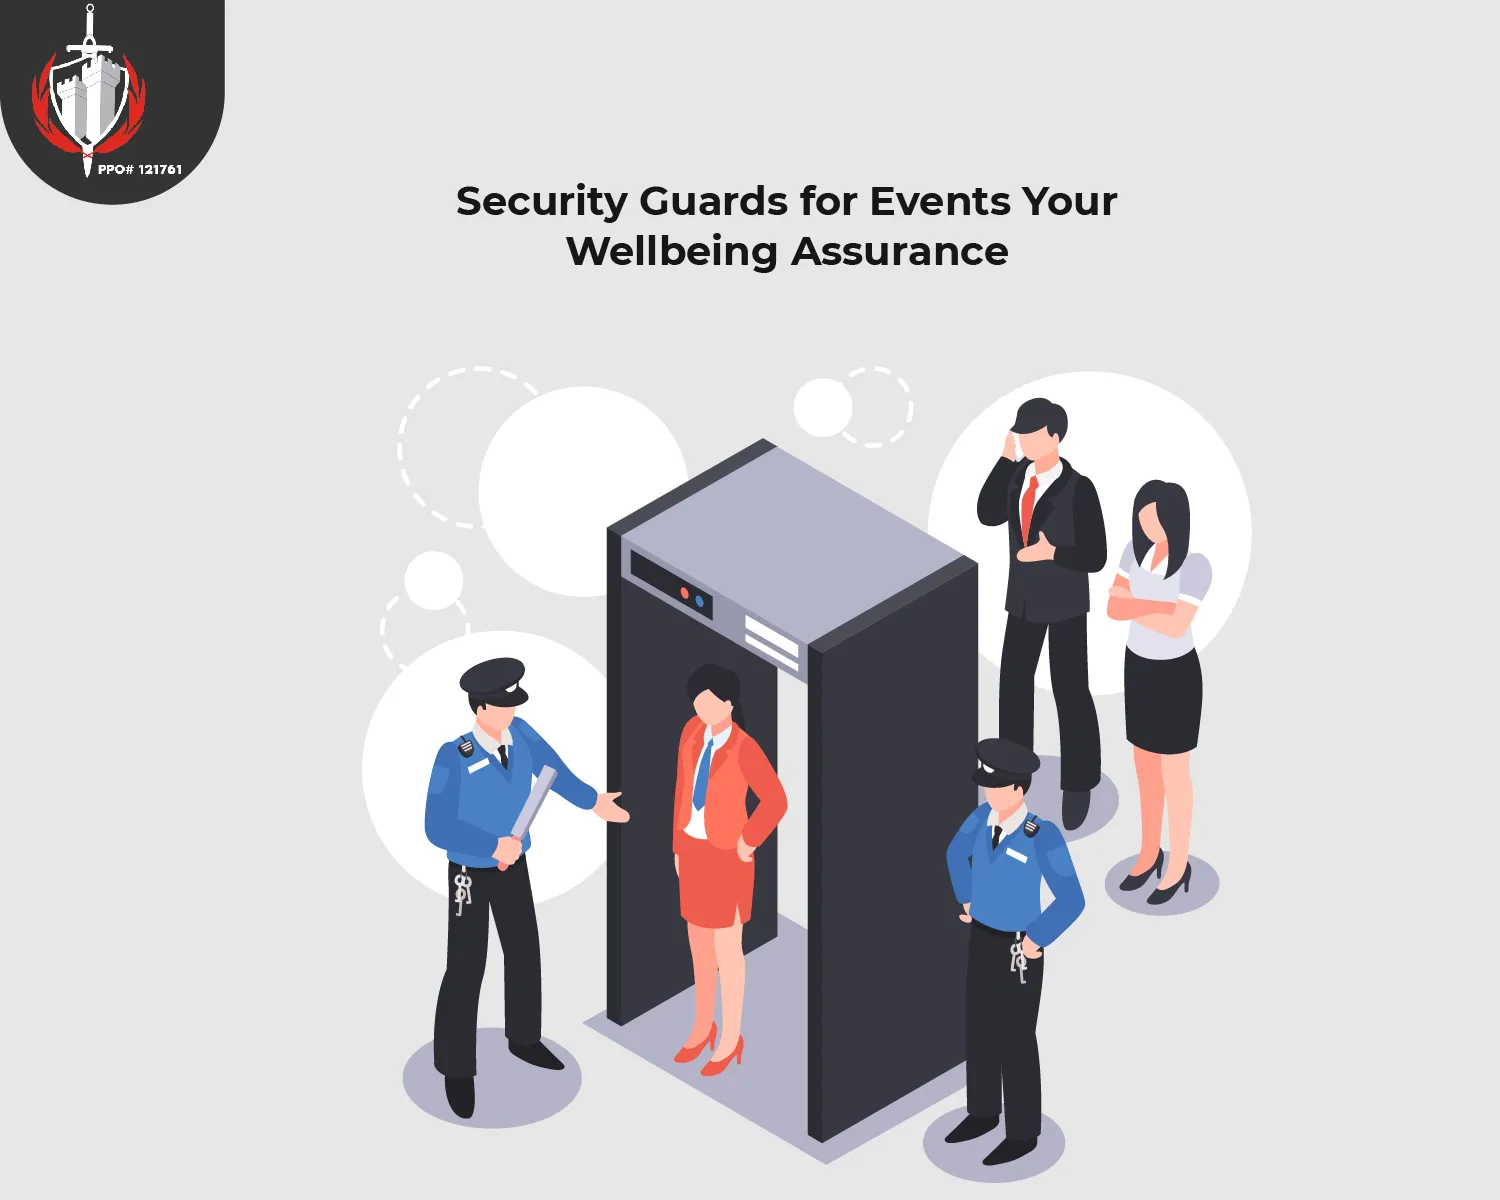 Security Guards for Events: Your Wellbeing Assurance